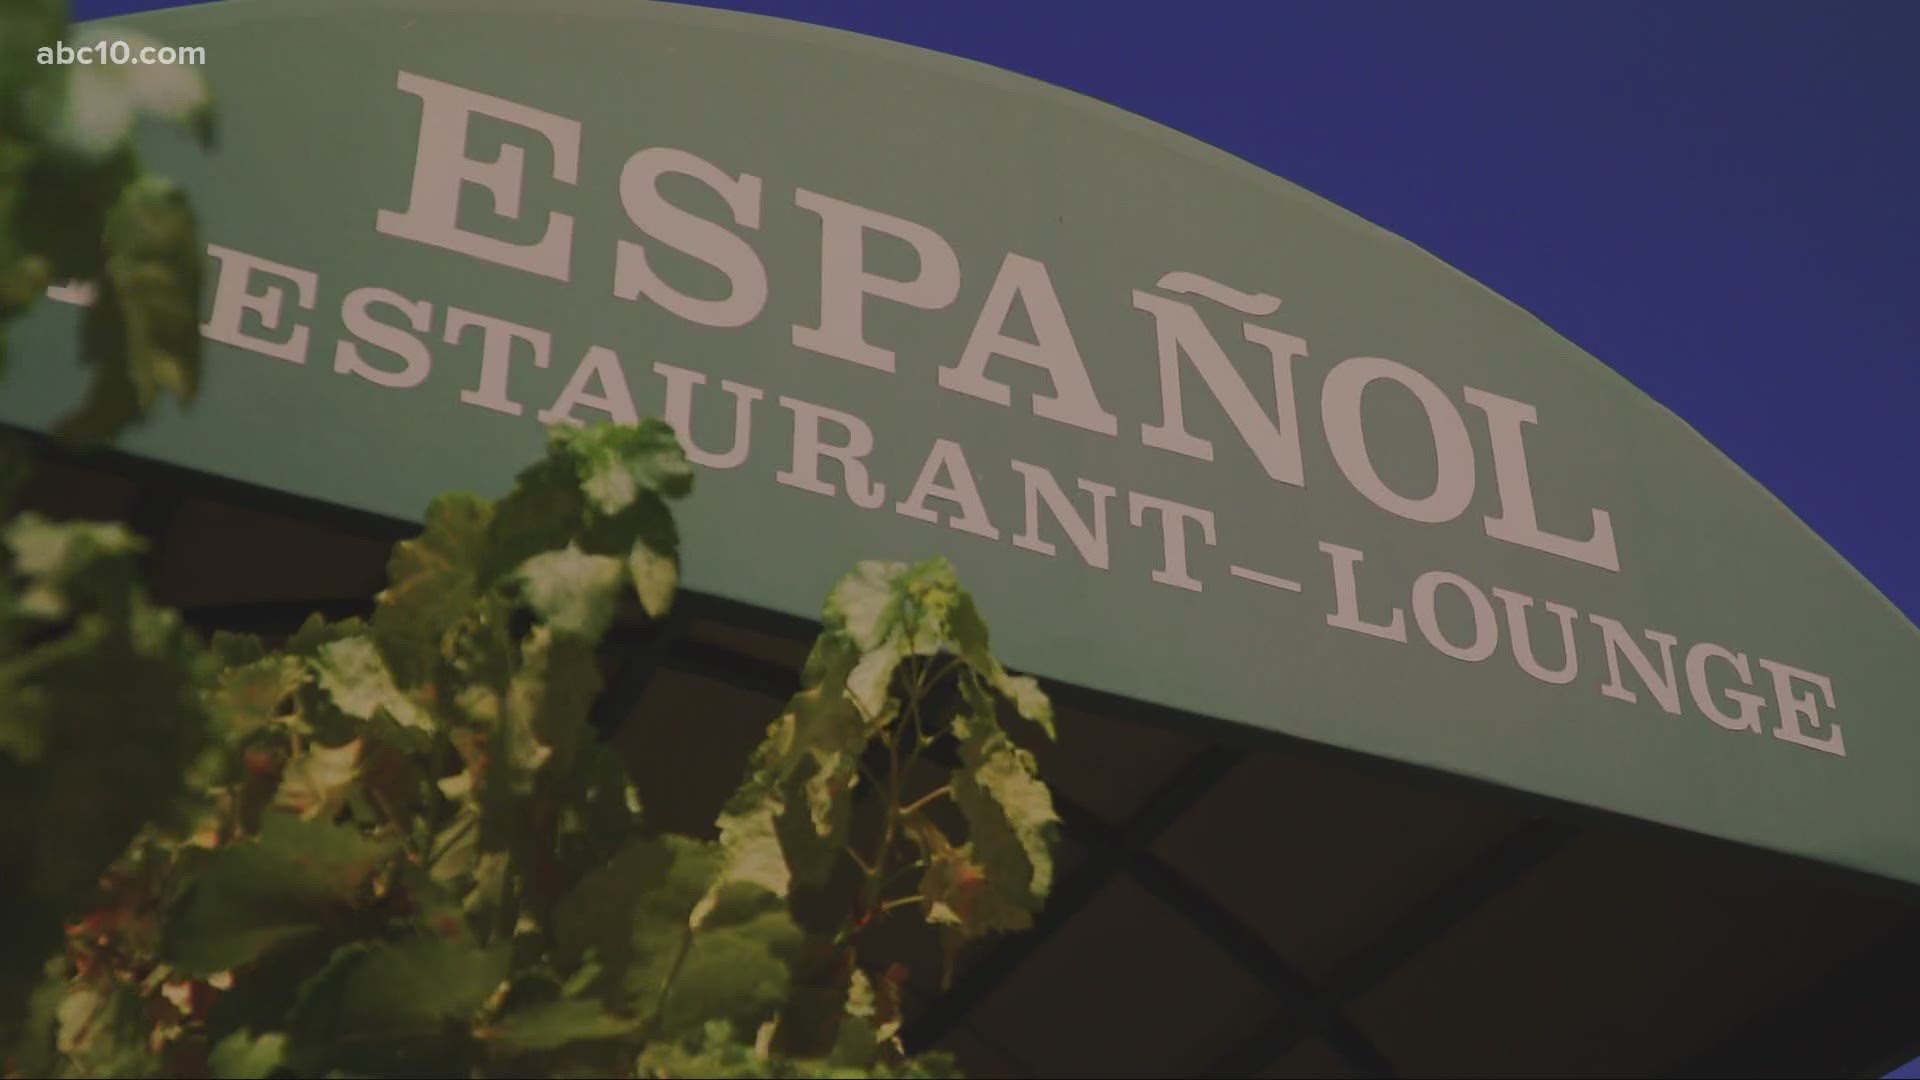 Español Italian Restaurant lasted nearly a century,  surviving through the Great Depression, but the coronavirus pandemic is forcing the business to close